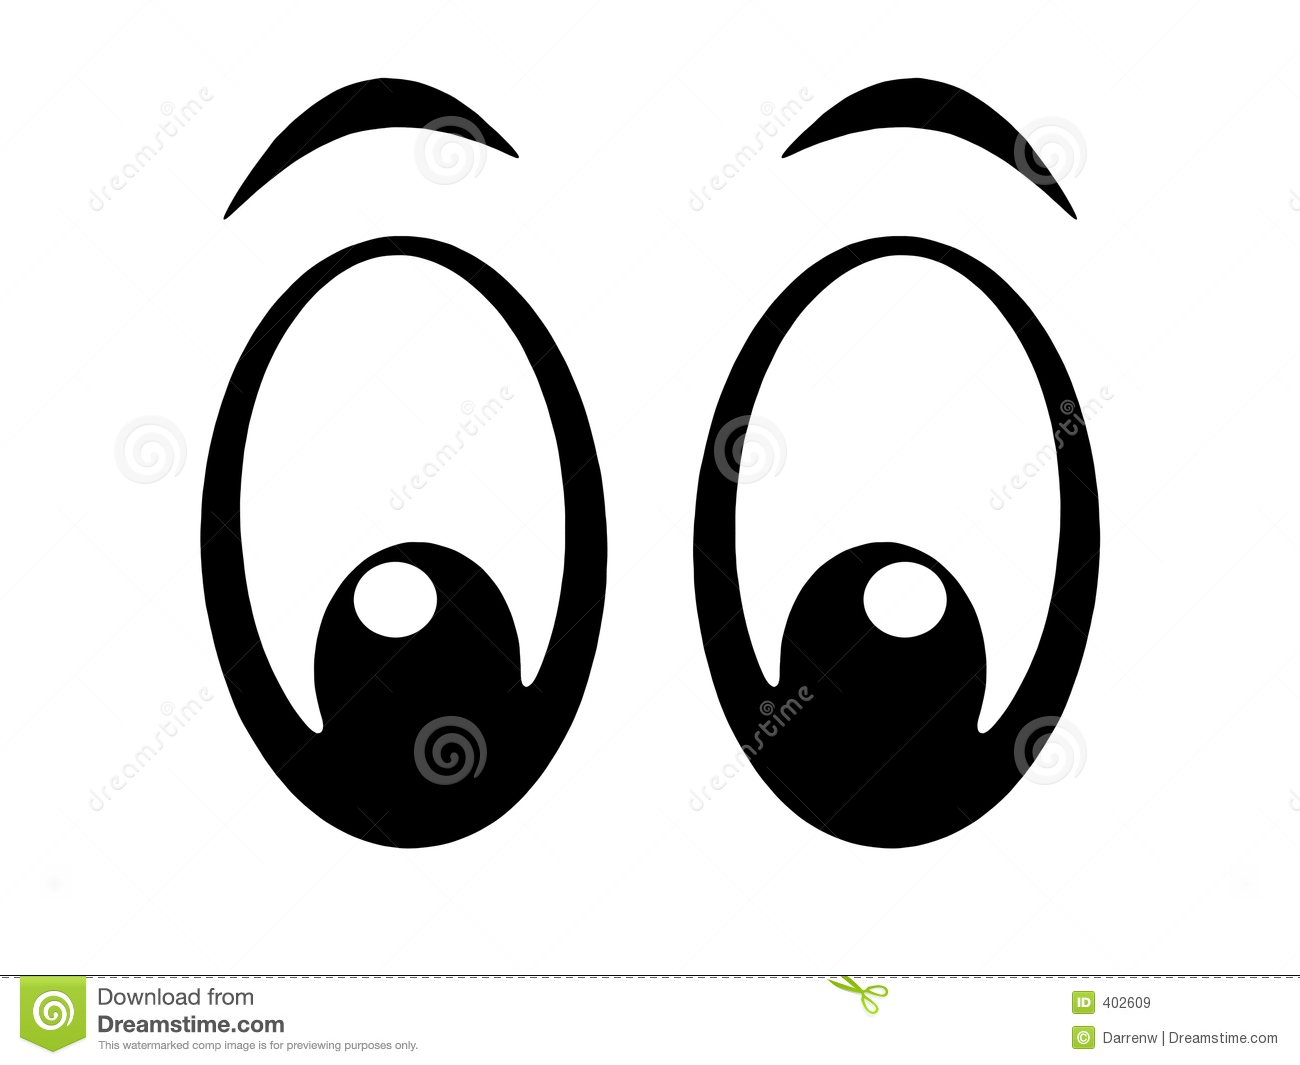 Set of eyes clipart. Images o